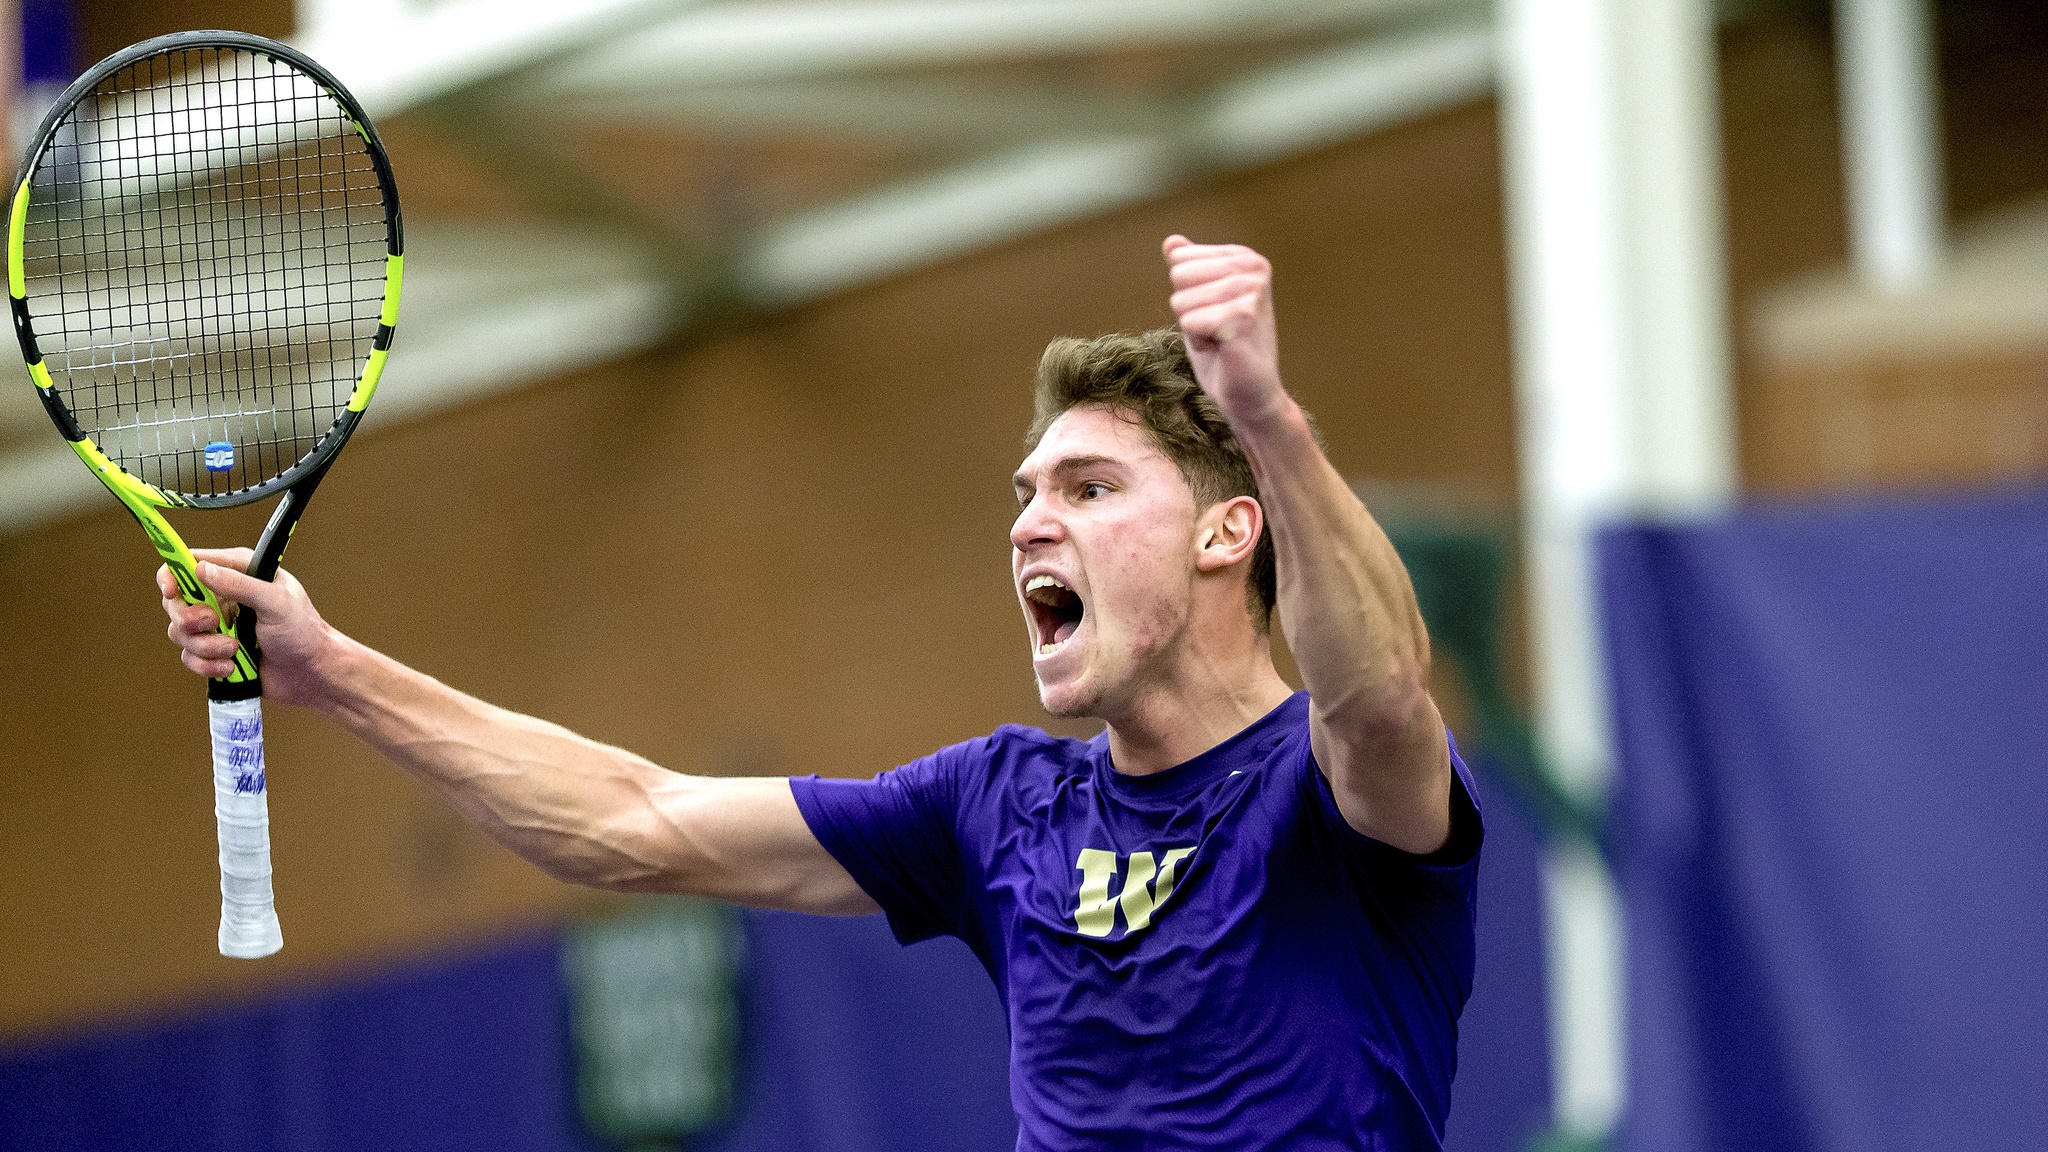 The University of Washington men's tennis team defeats Cal-Poly University 6-1 at the Nordstrom Tennis Center on January 29